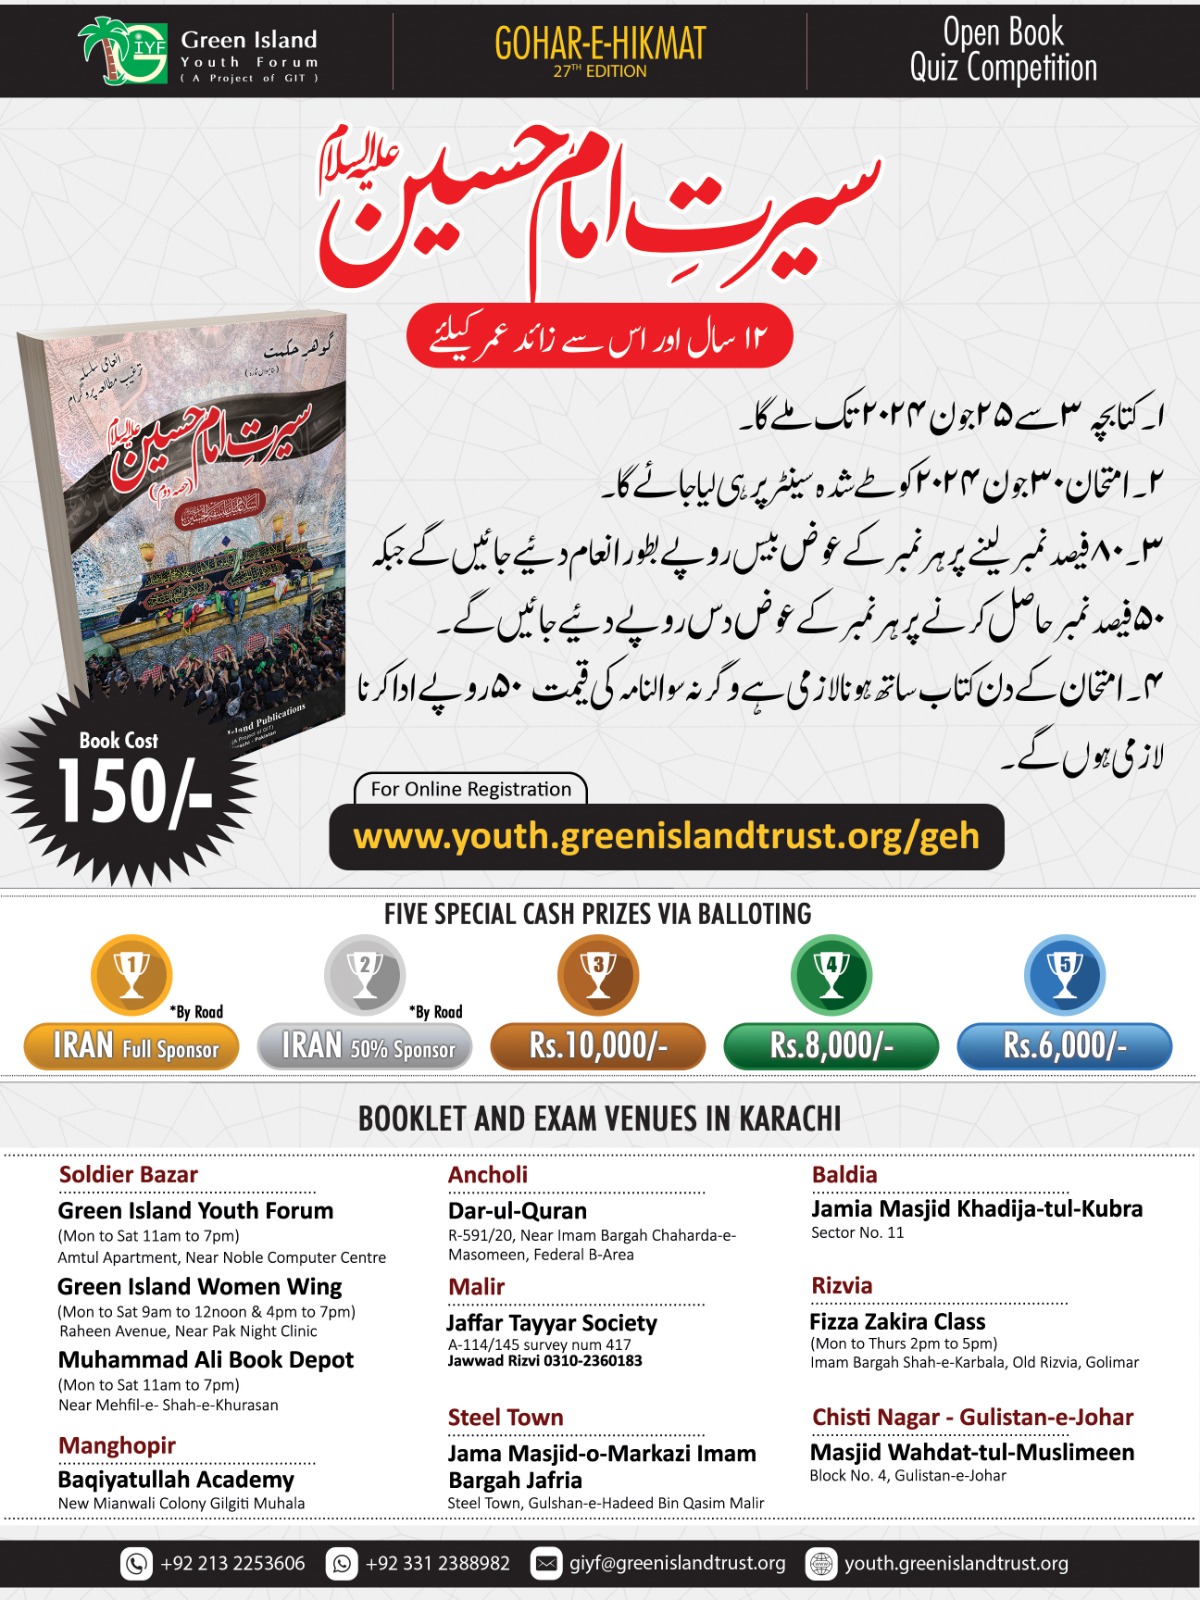 Gohar-e-Hikmat 27th Edition | Physical Competition